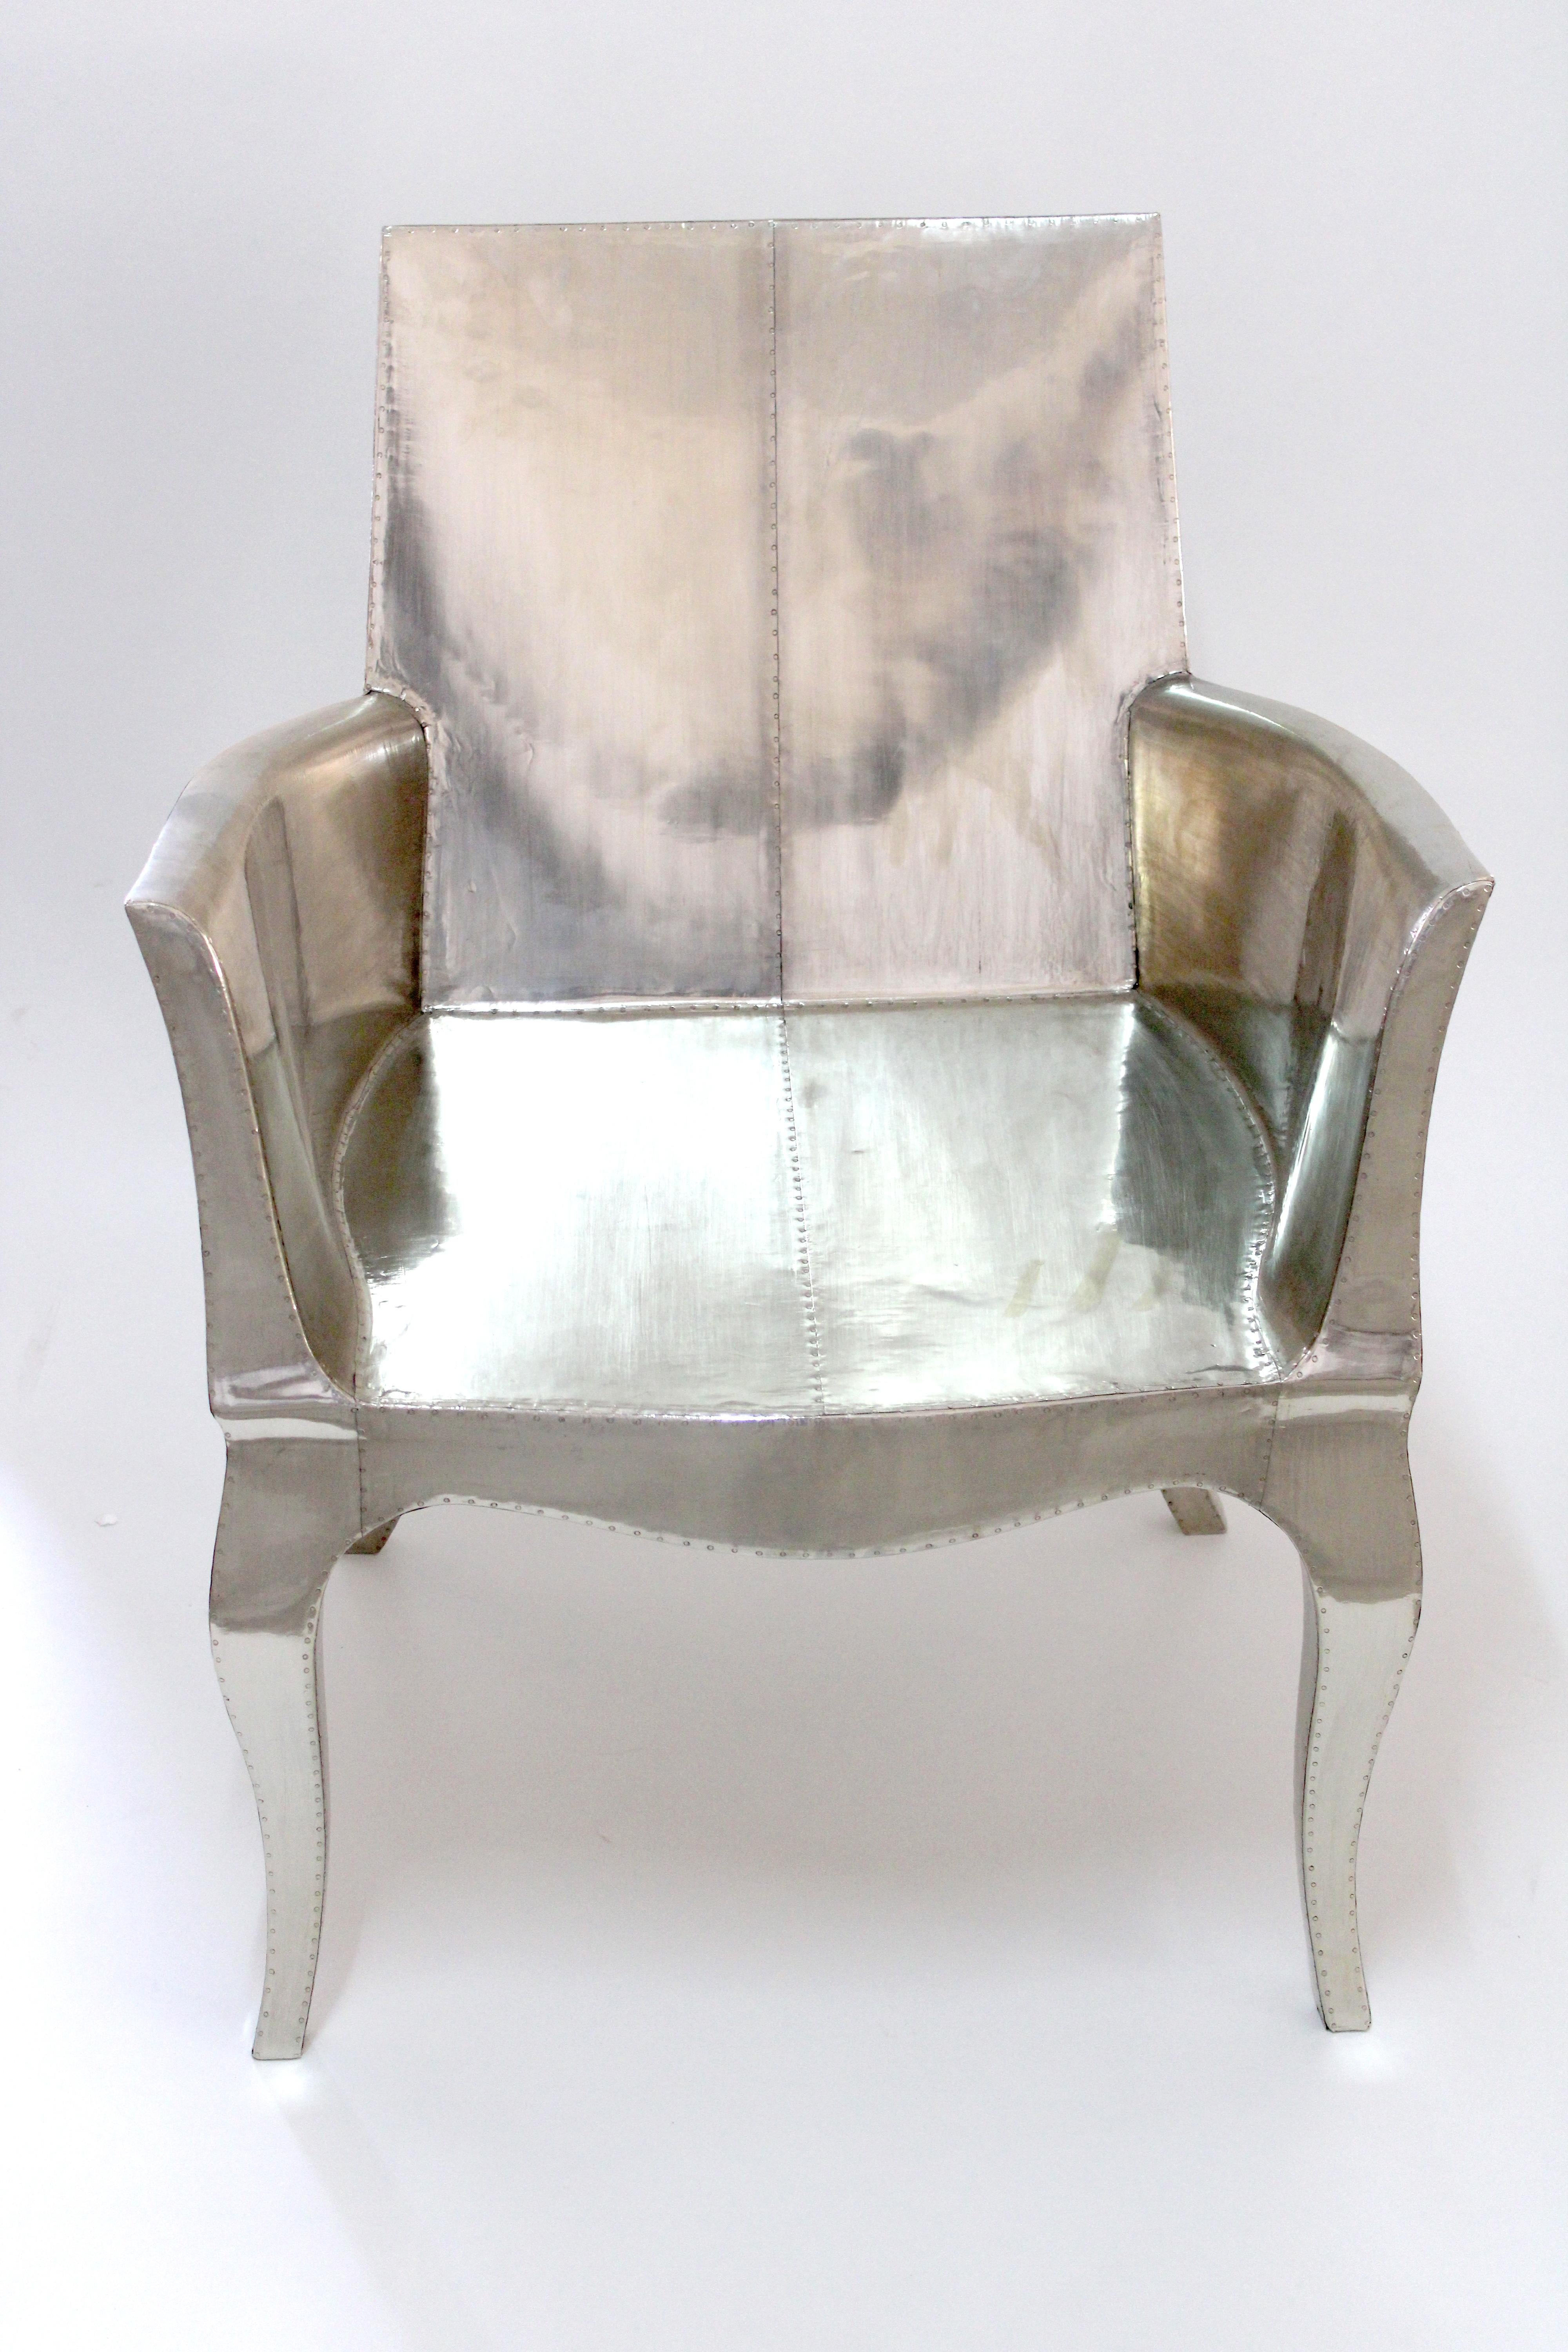 Indian Art Deco Accent Chair in Smooth White Bronze by Paul Mathieu for S. Odegard For Sale